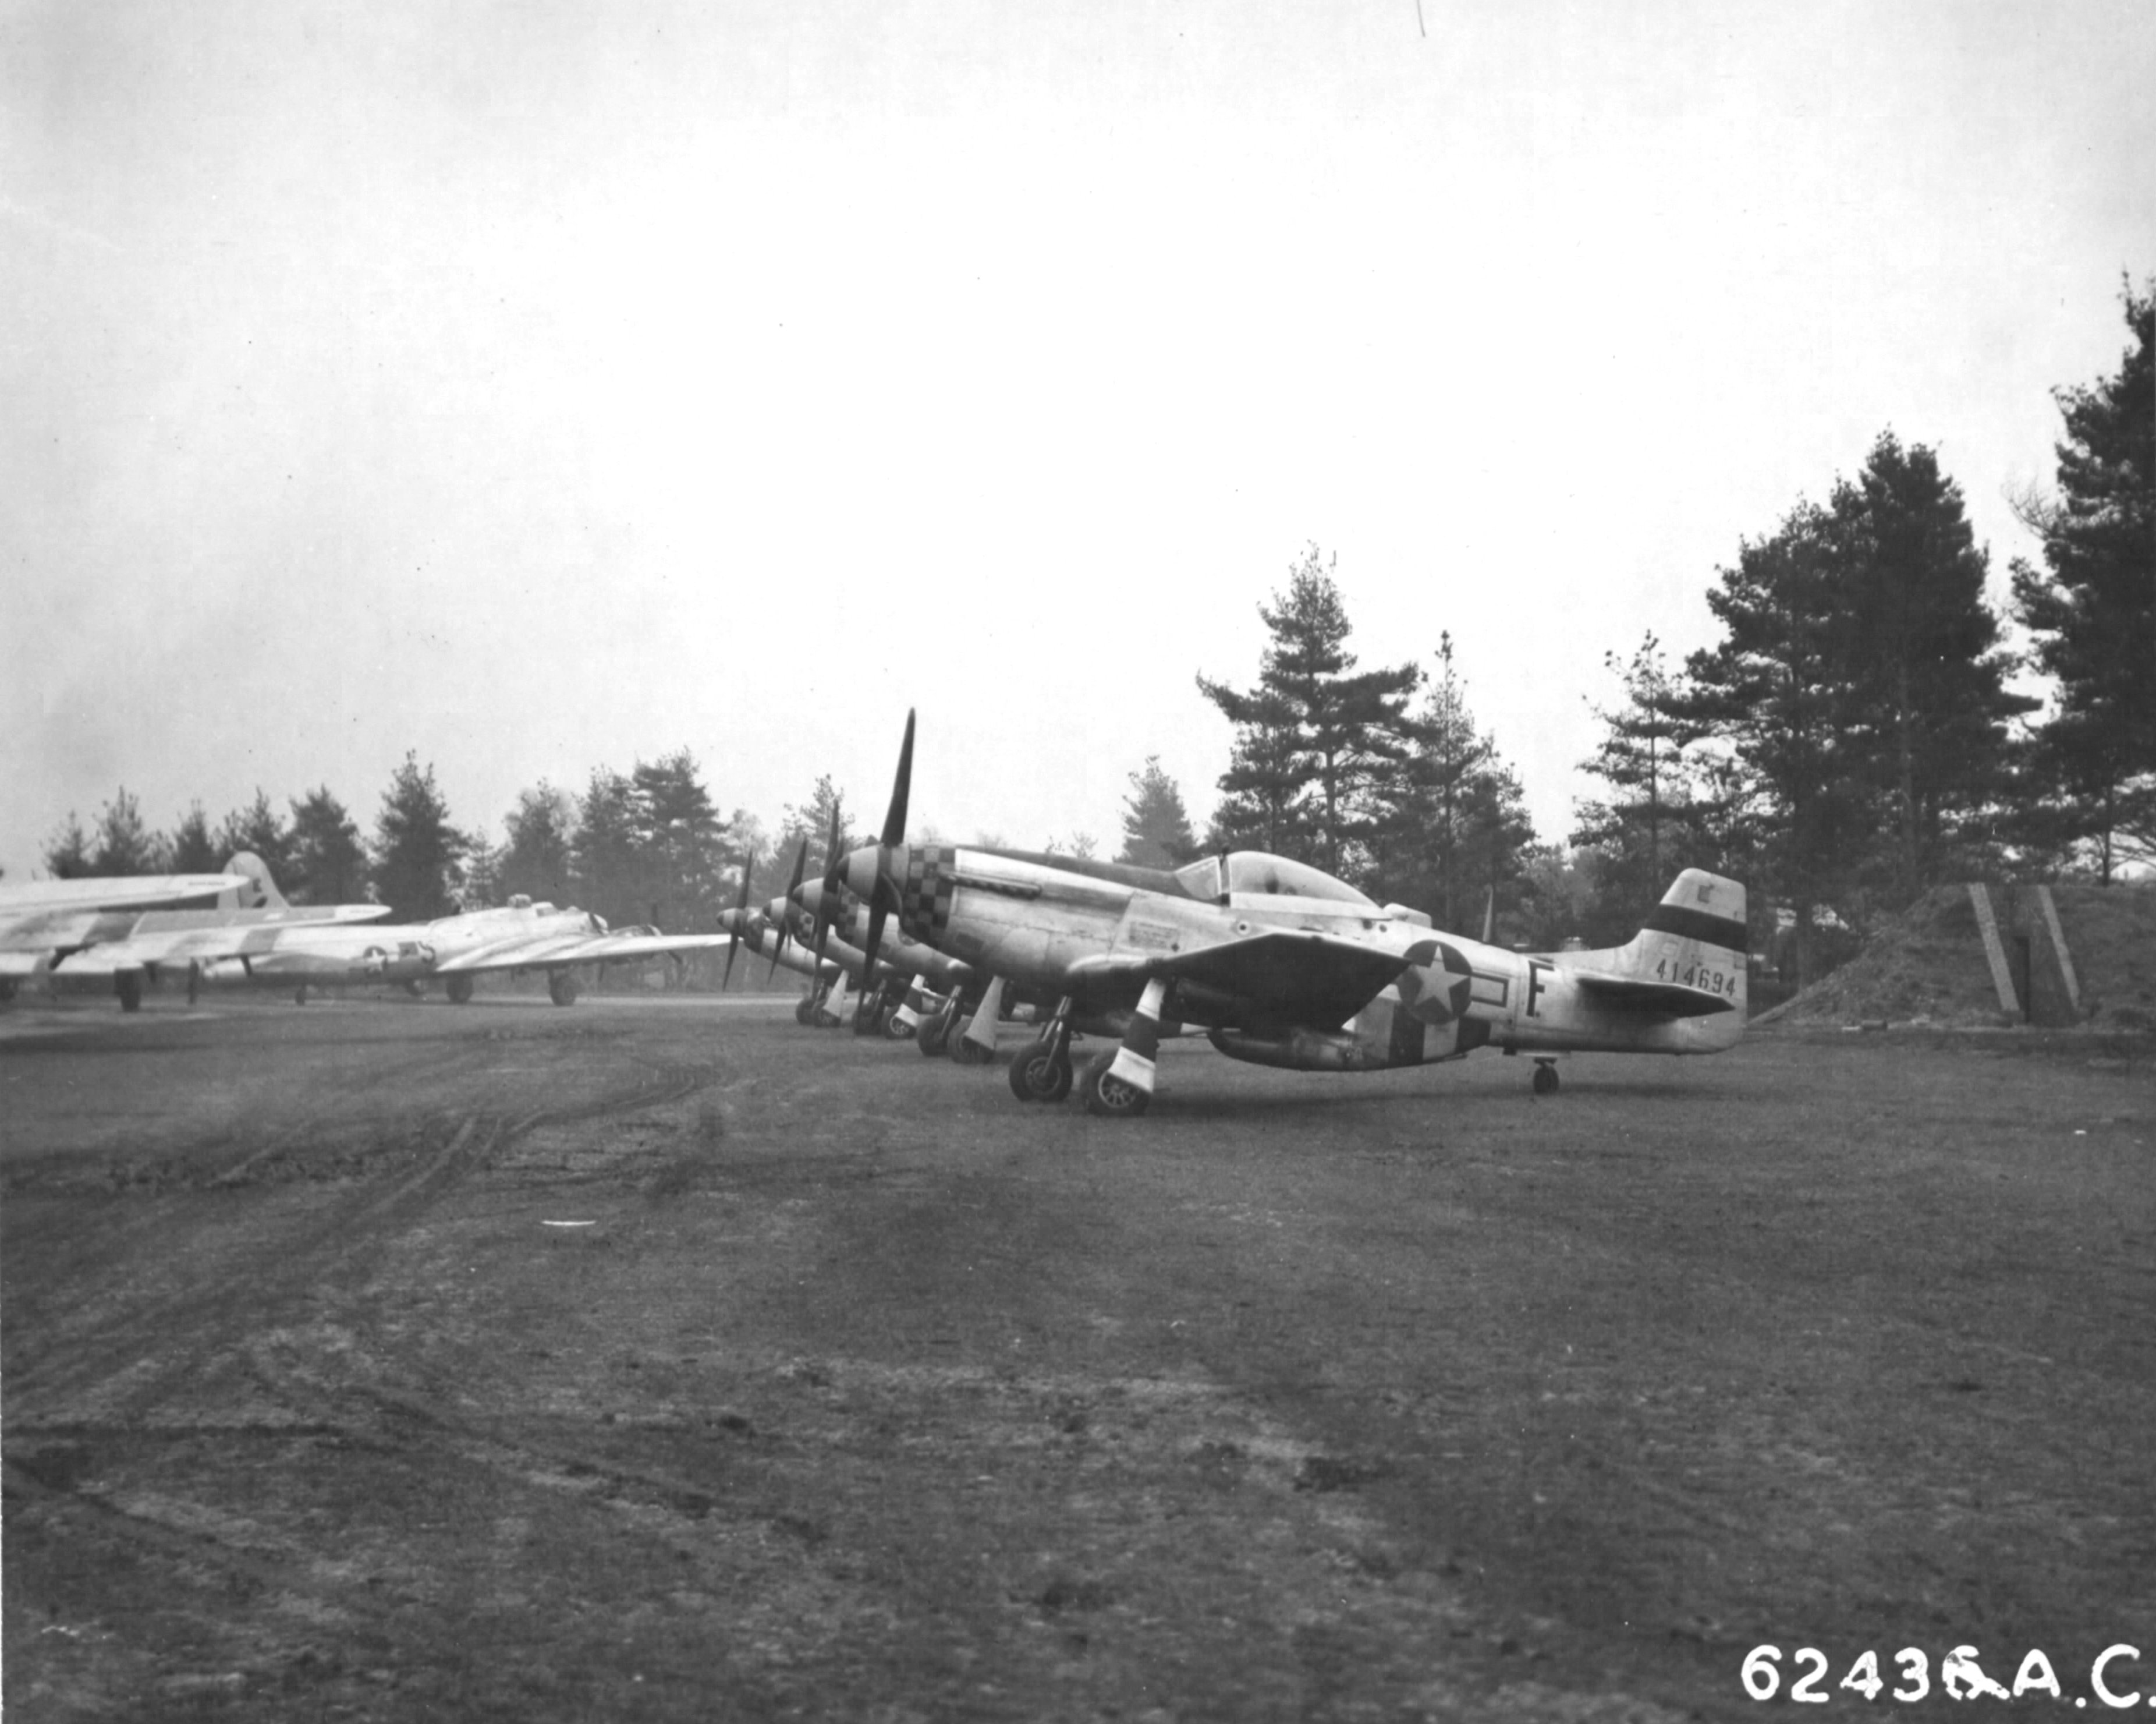 P-51D Mustangs of the 353rd Fighter Group in a line at a B-17 Fortress base of the 493rd Bomb Group, RAF Debach, Suffolk, England, UK, June 1945.